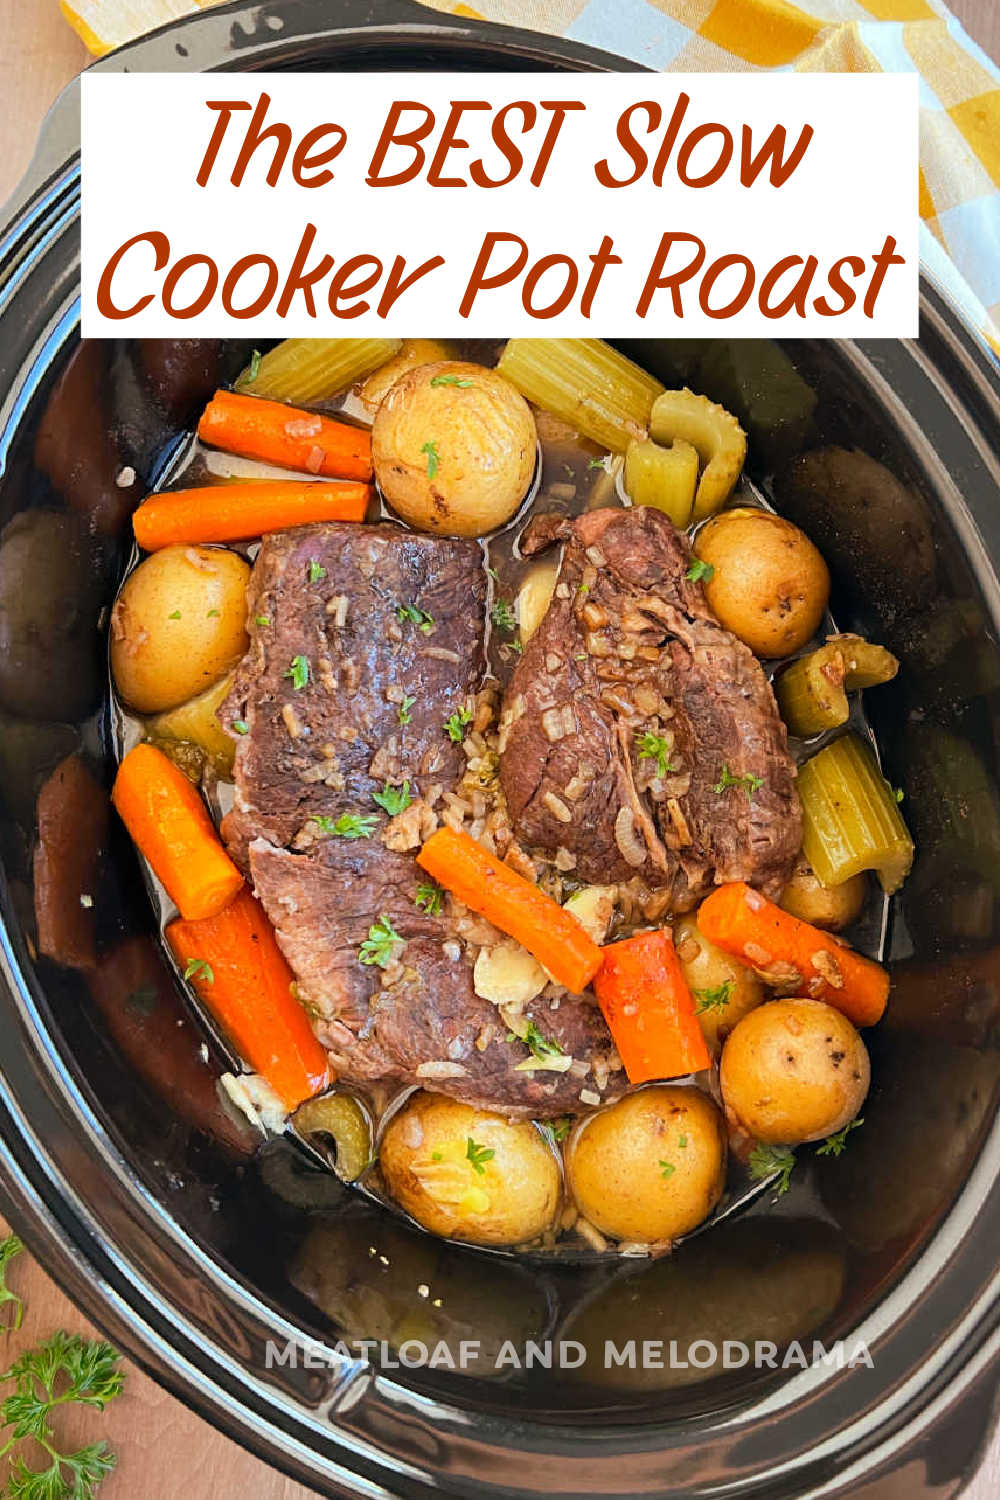 Easy Slow Cooker Pot Roast with onion soup mix, potatoes and carrots cooks on low in the Crock Pot until fork tender and delicious. This easy slow cooker recipe makes the best pot roast! via @meamel